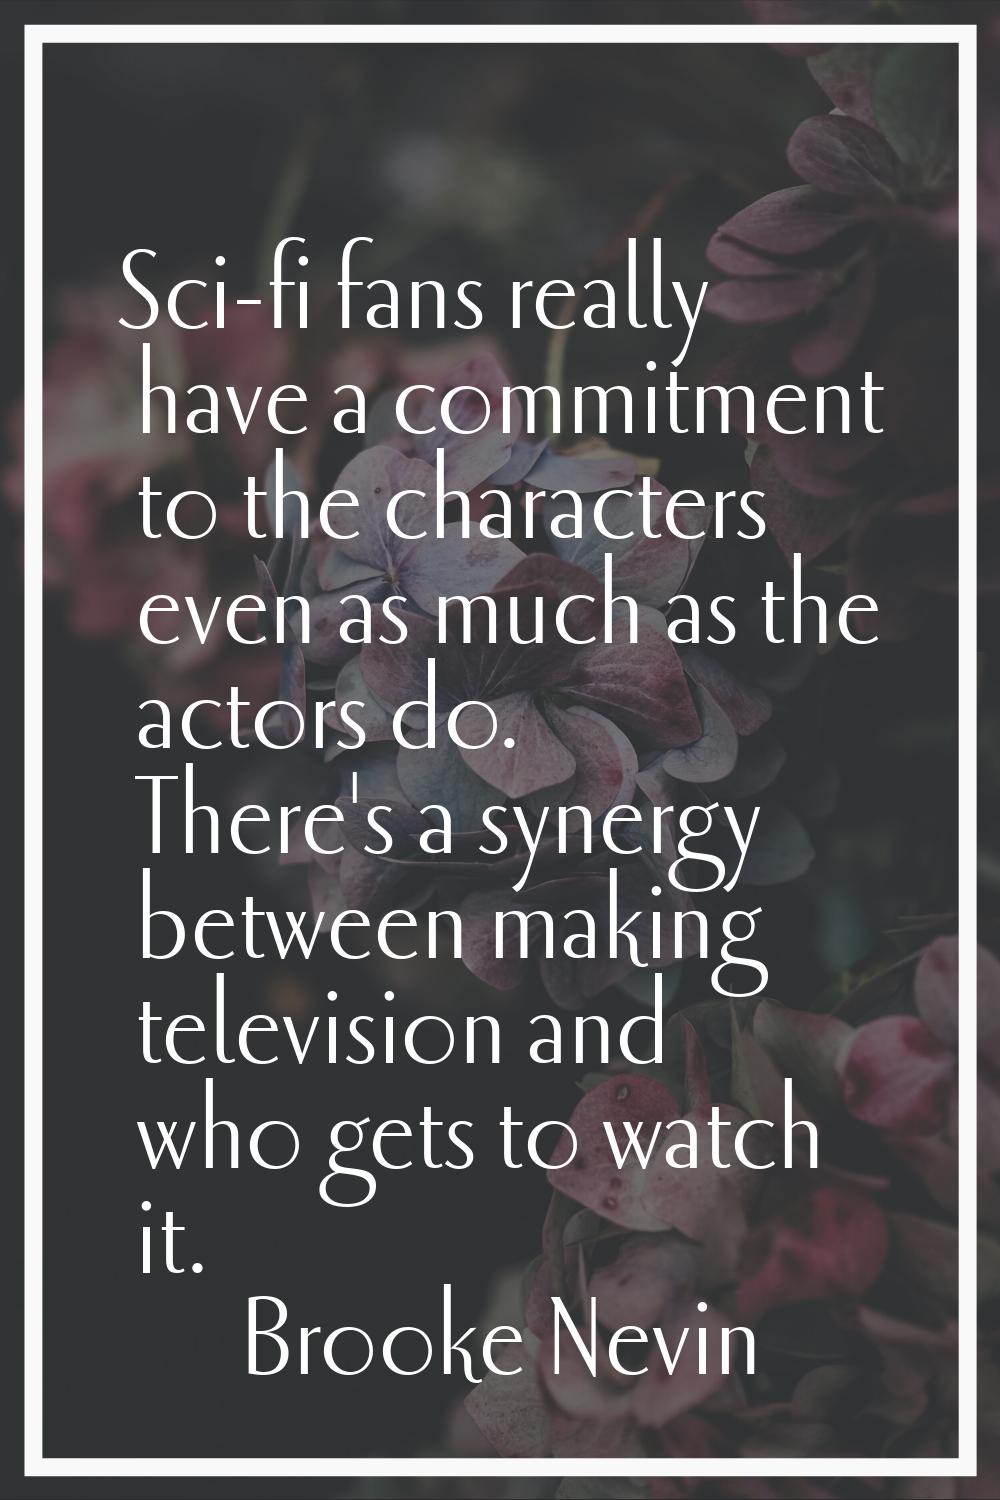 Sci-fi fans really have a commitment to the characters even as much as the actors do. There's a syn